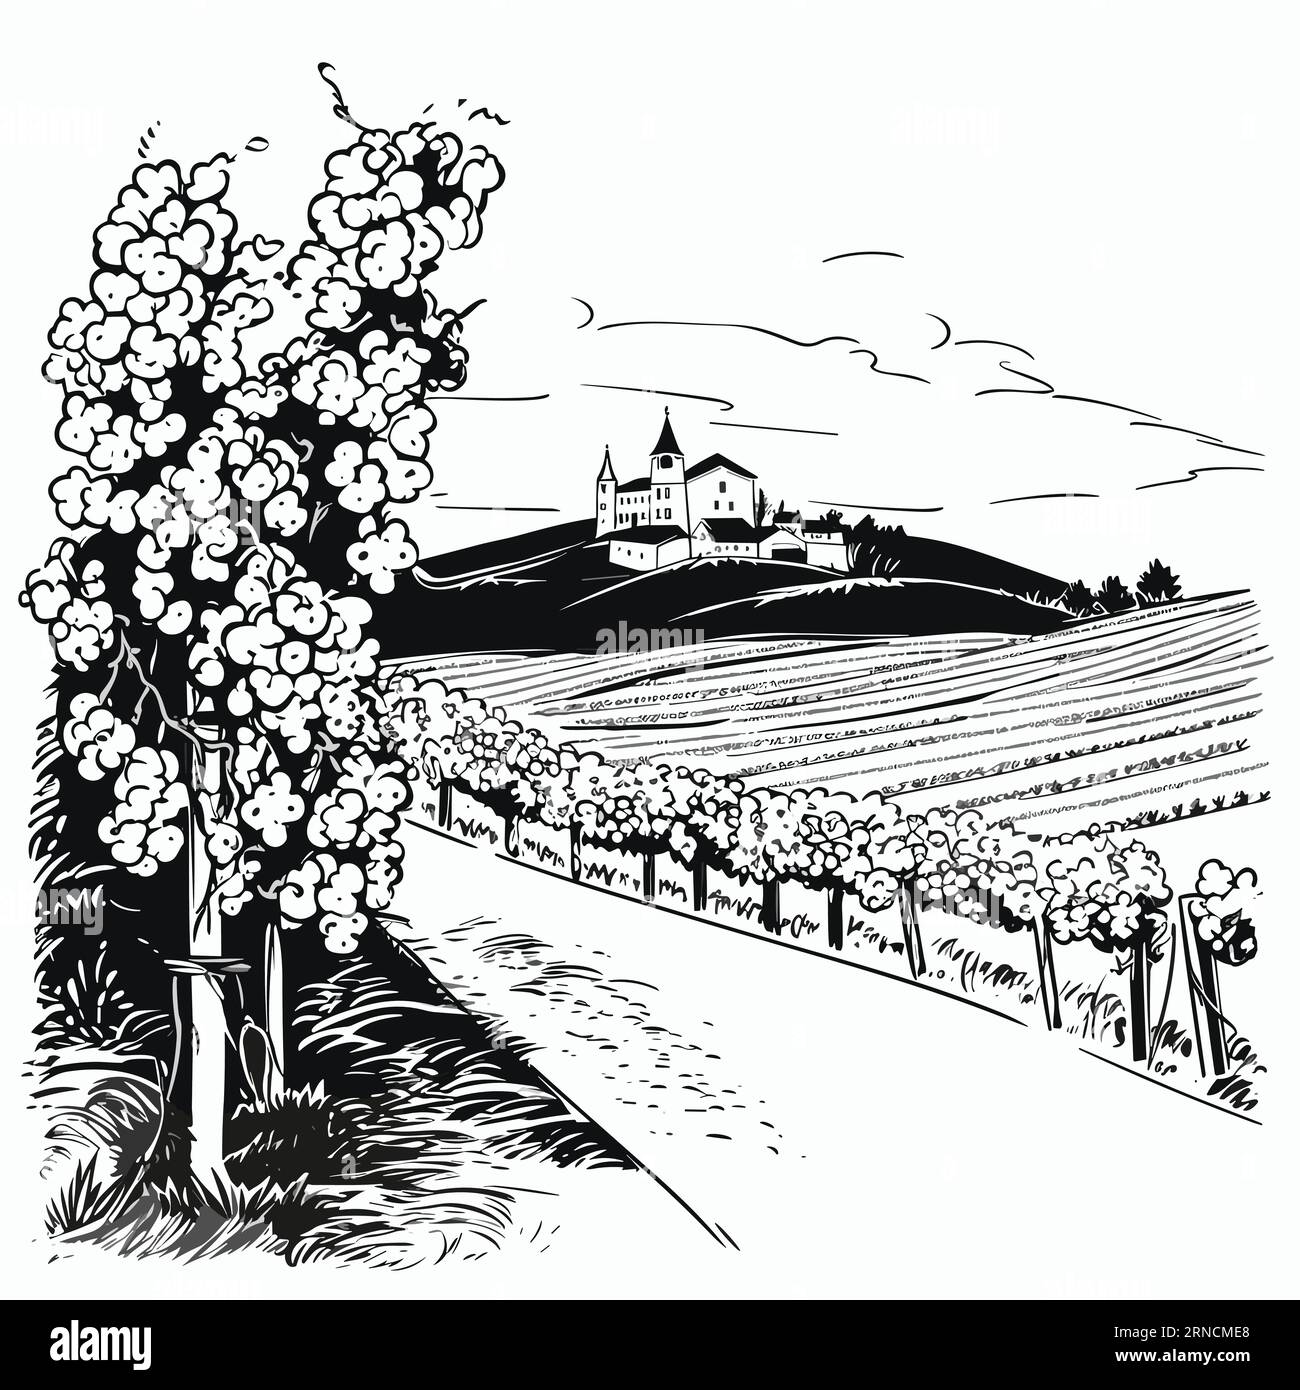 Ink And Pencil Drawing Image Of The Vineyard Field With A Tree And Fence, In The Style Of Charming Character Illustrations Stock Vector